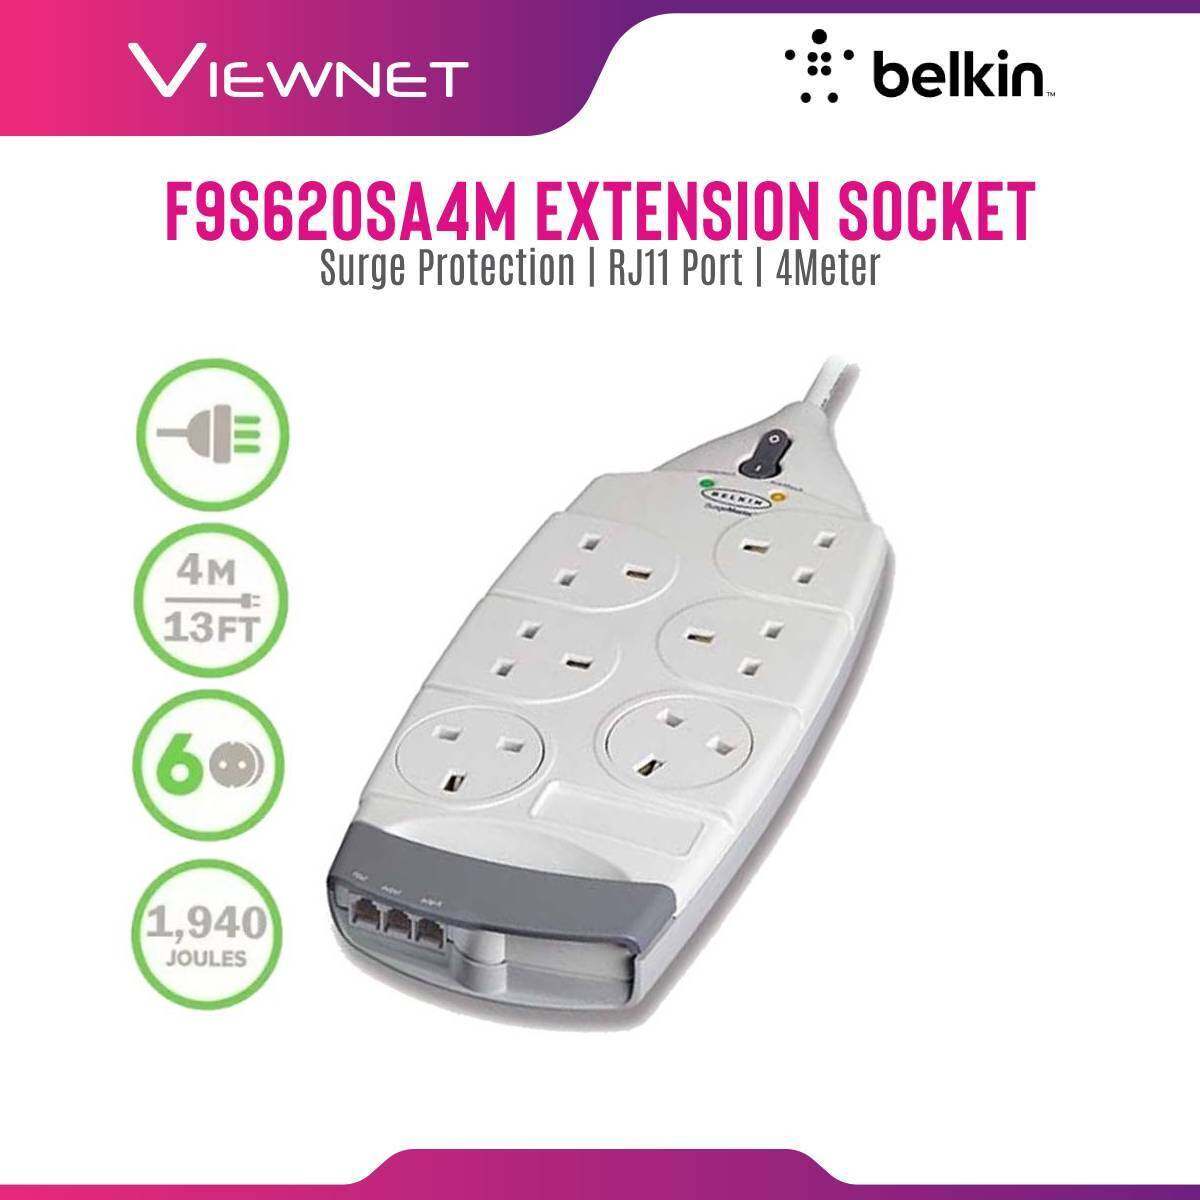 EXTENSION SOCKET BELKIN SURGE PROTECTOR 6-PLUGS WITH RJ11 PORT PROTECTION 4M (F9S620SA4M)